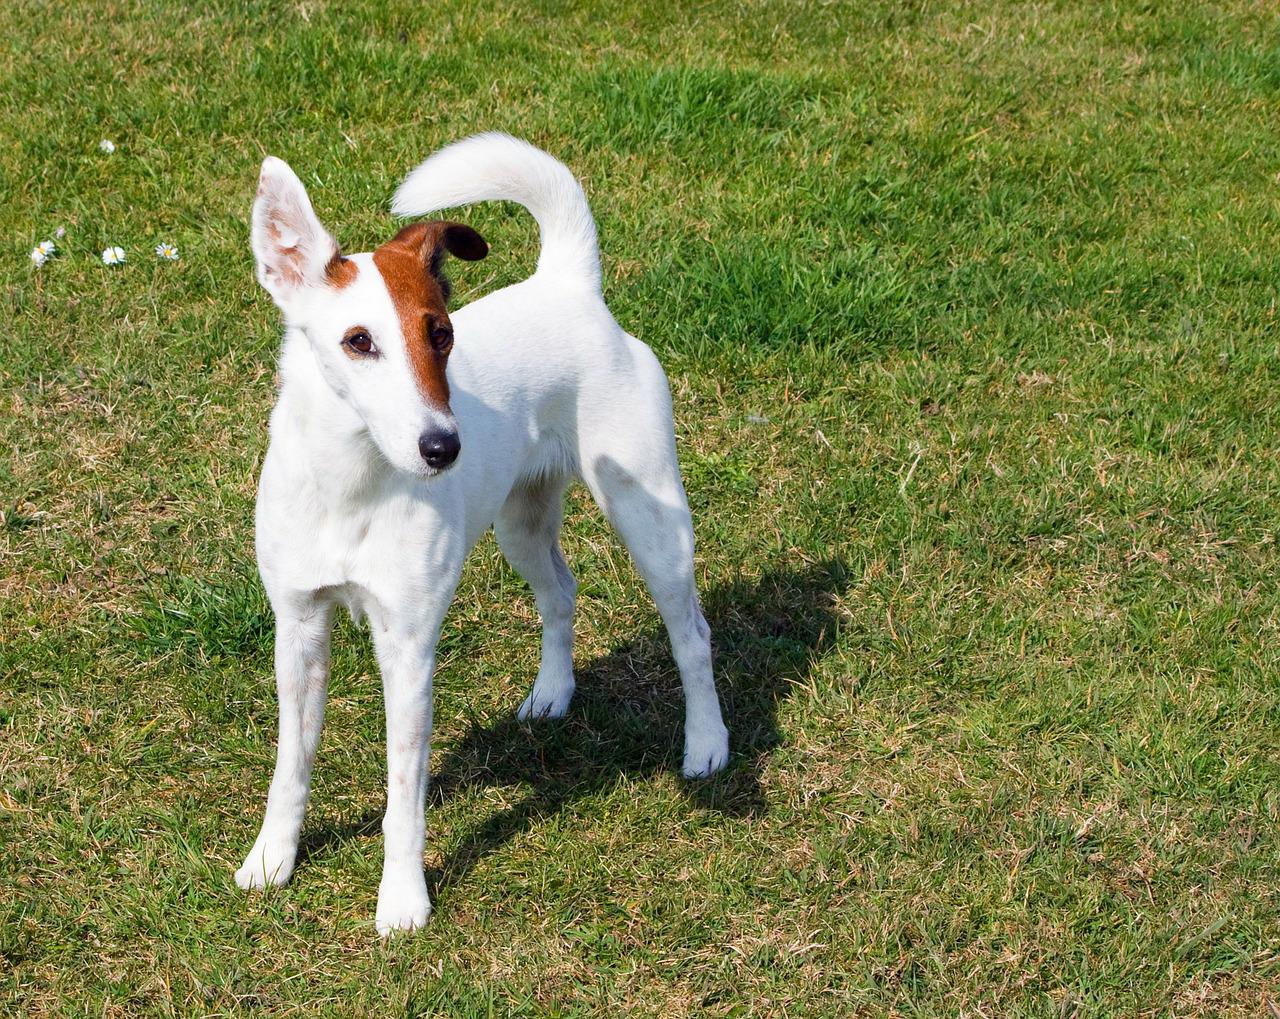 Smooth fox terrier standing on grass with a white coat and brown coloring